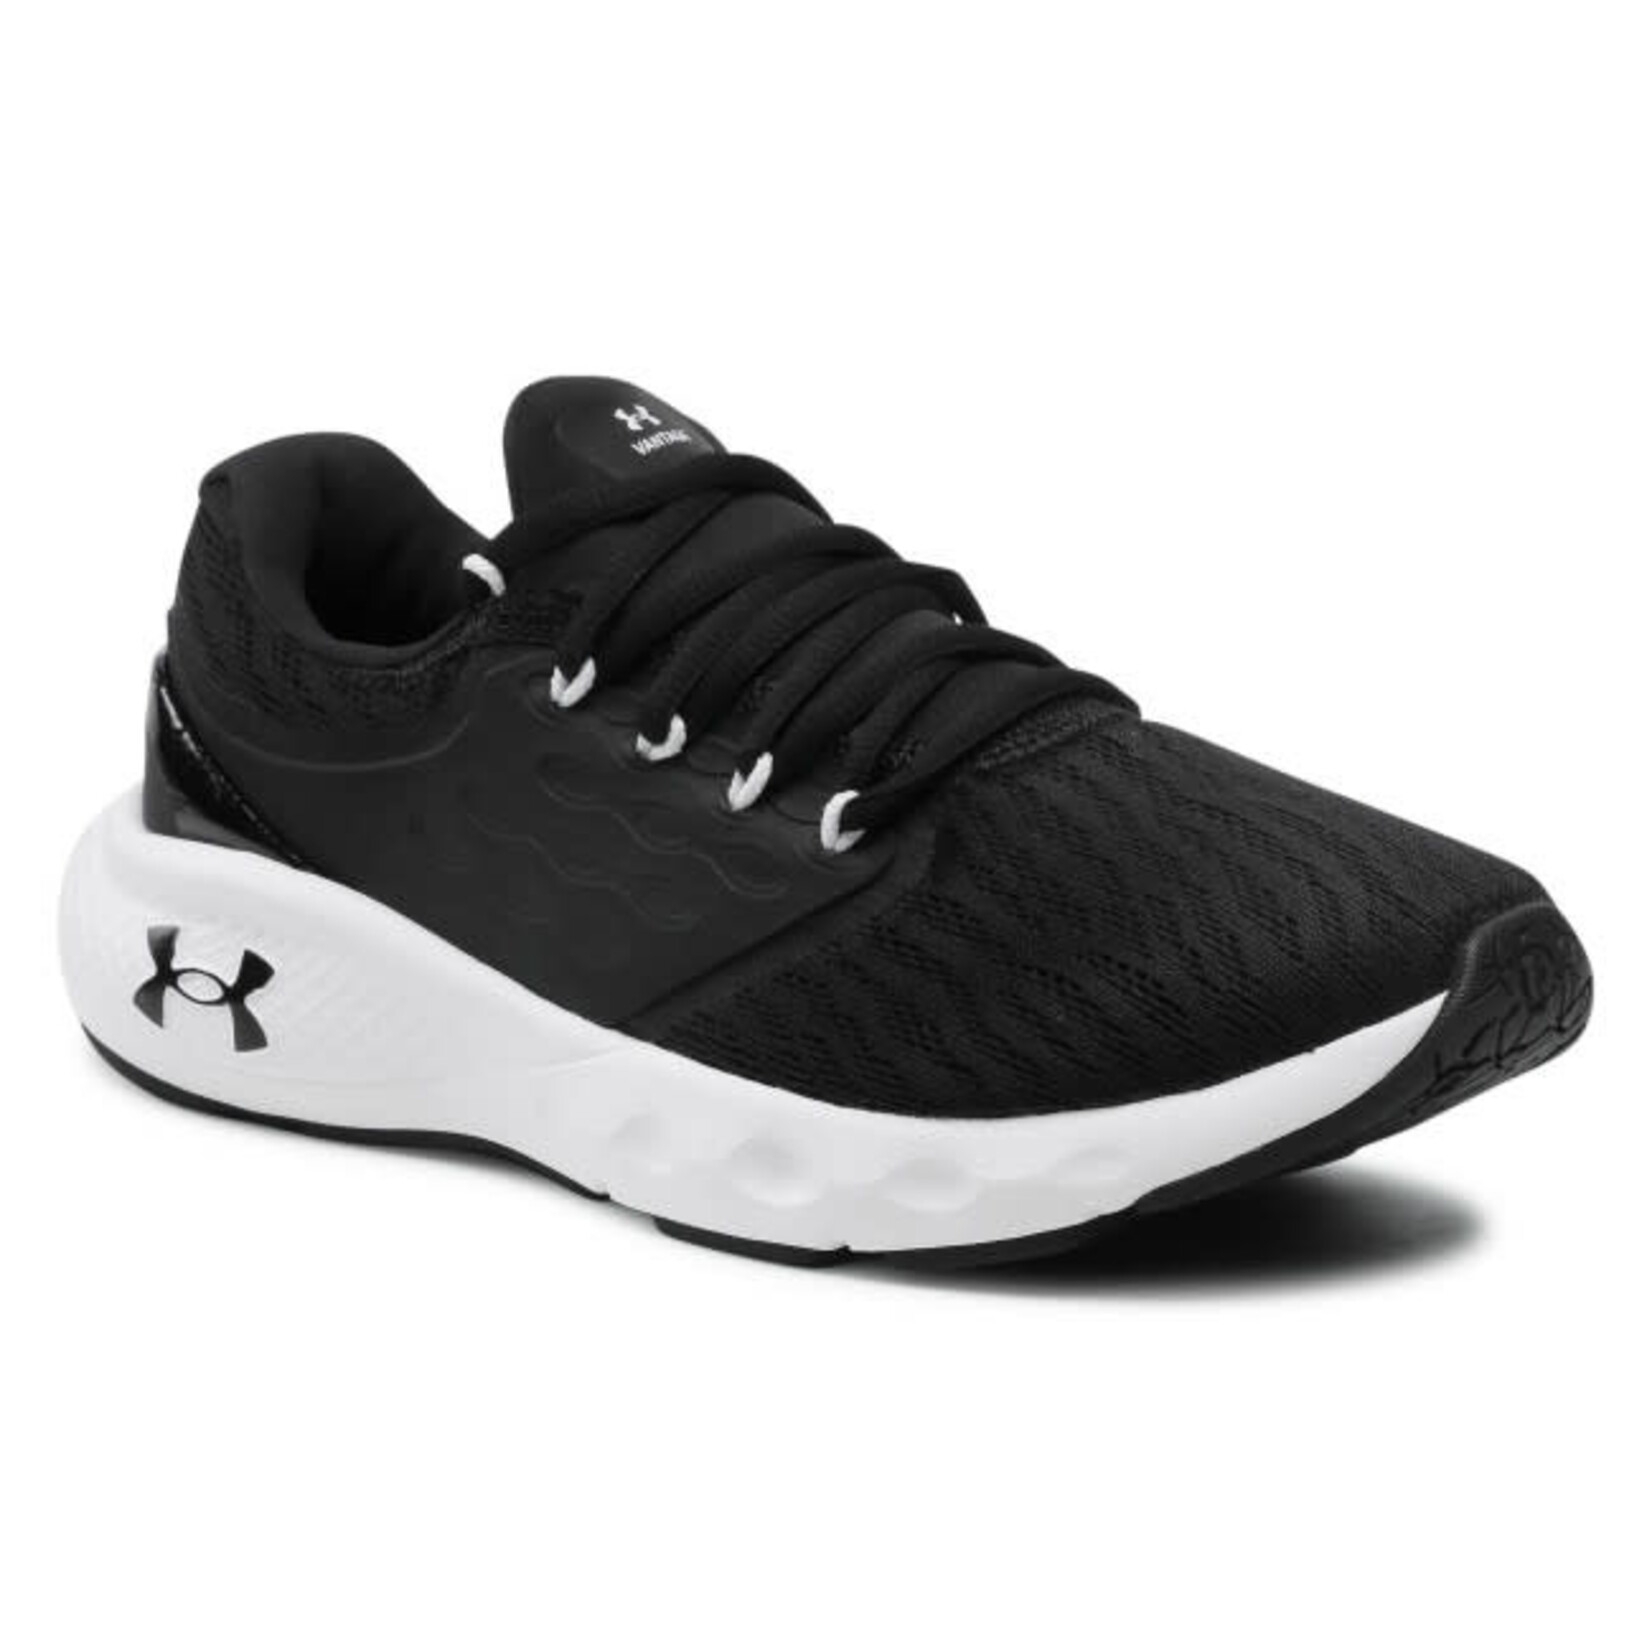 Under Armour Under Armour Running Shoes, Charged Vantage, Ladies